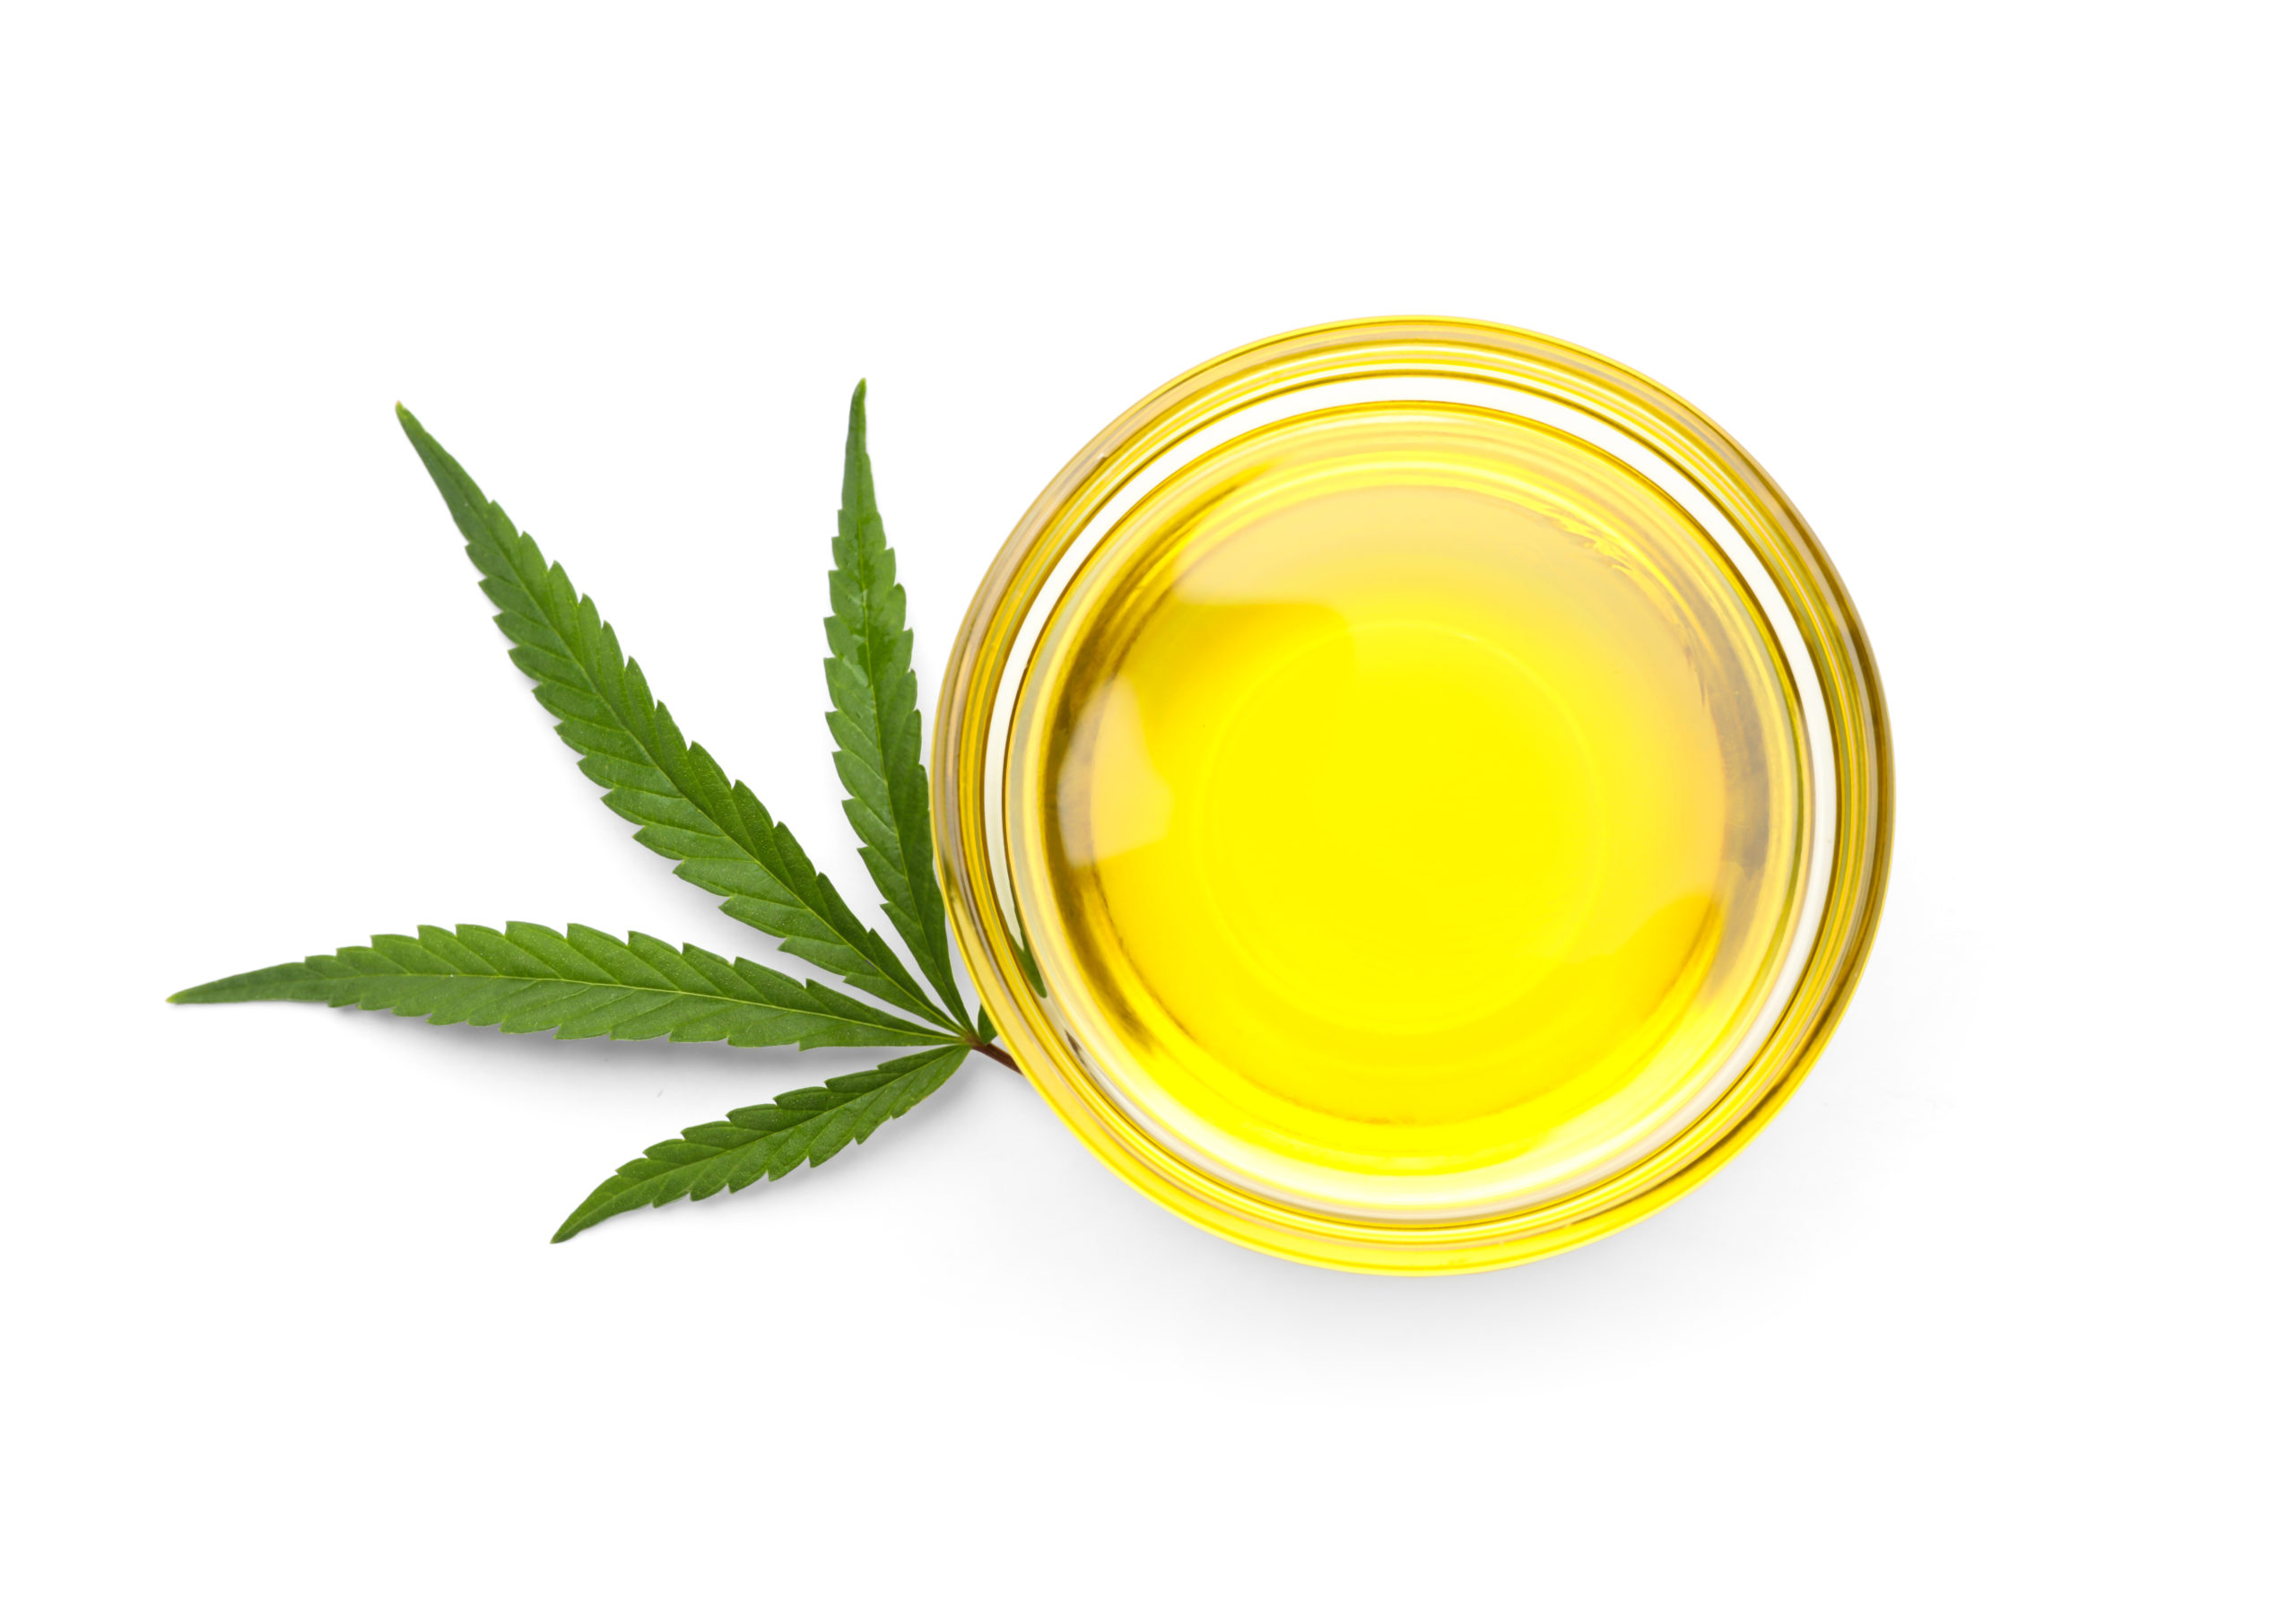 You are currently viewing How to Make Cannabis Cooking Oil.